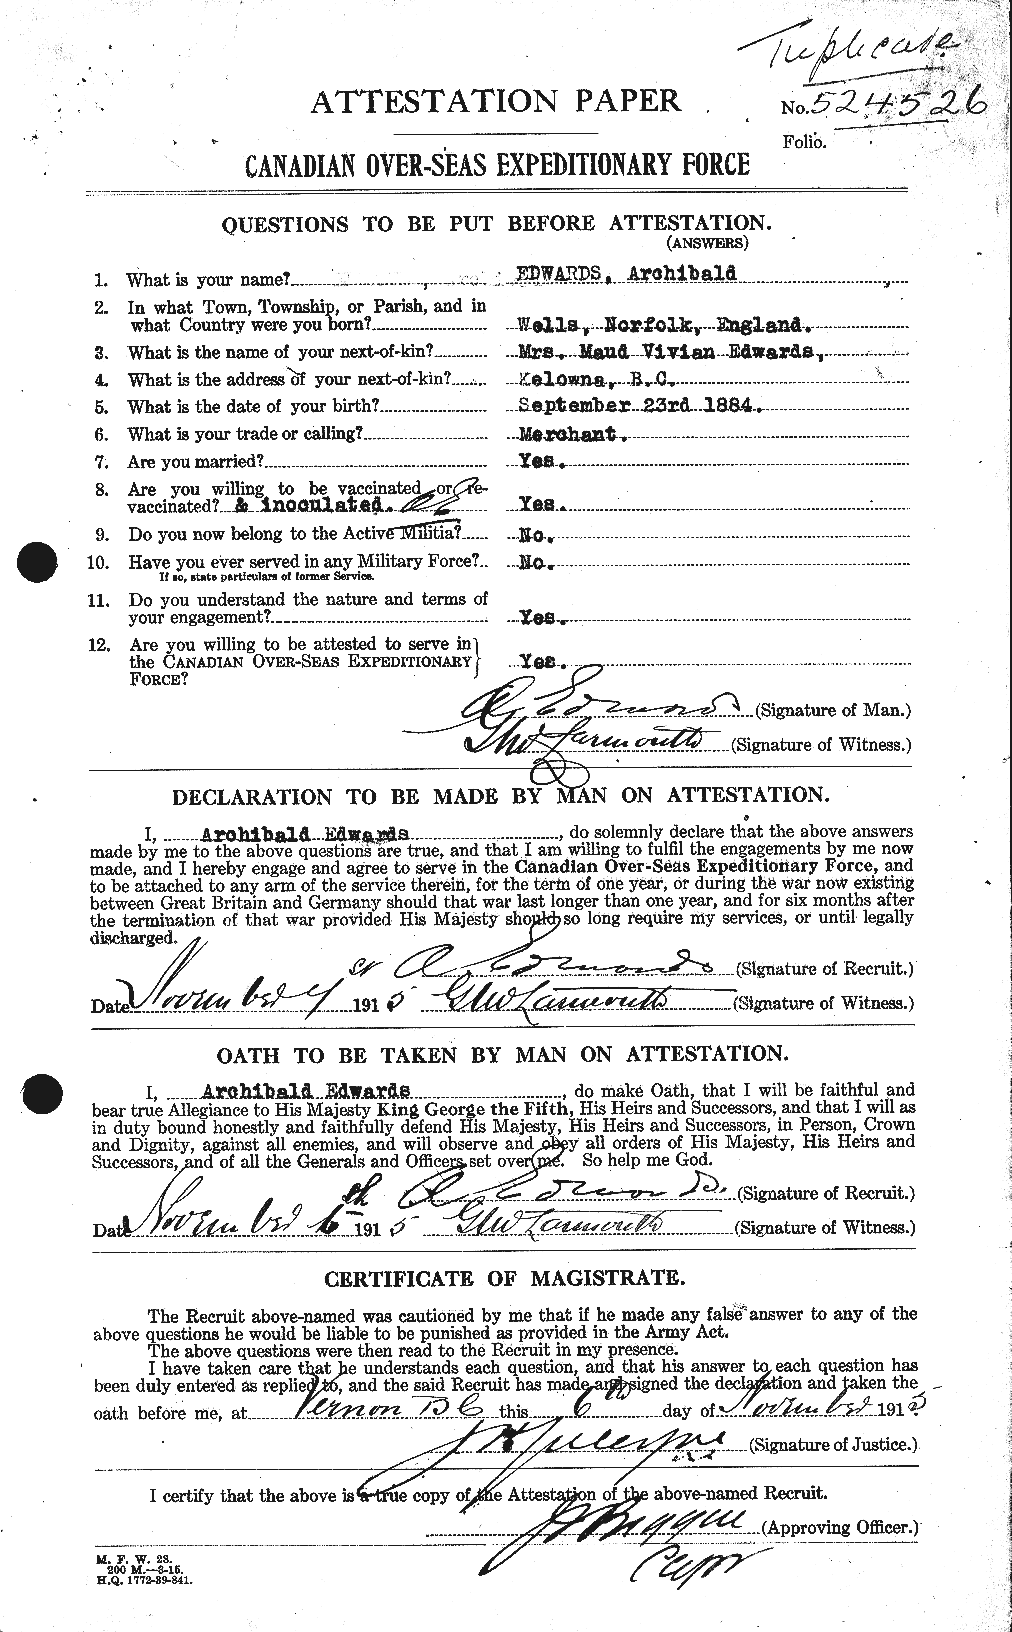 Personnel Records of the First World War - CEF 313119a